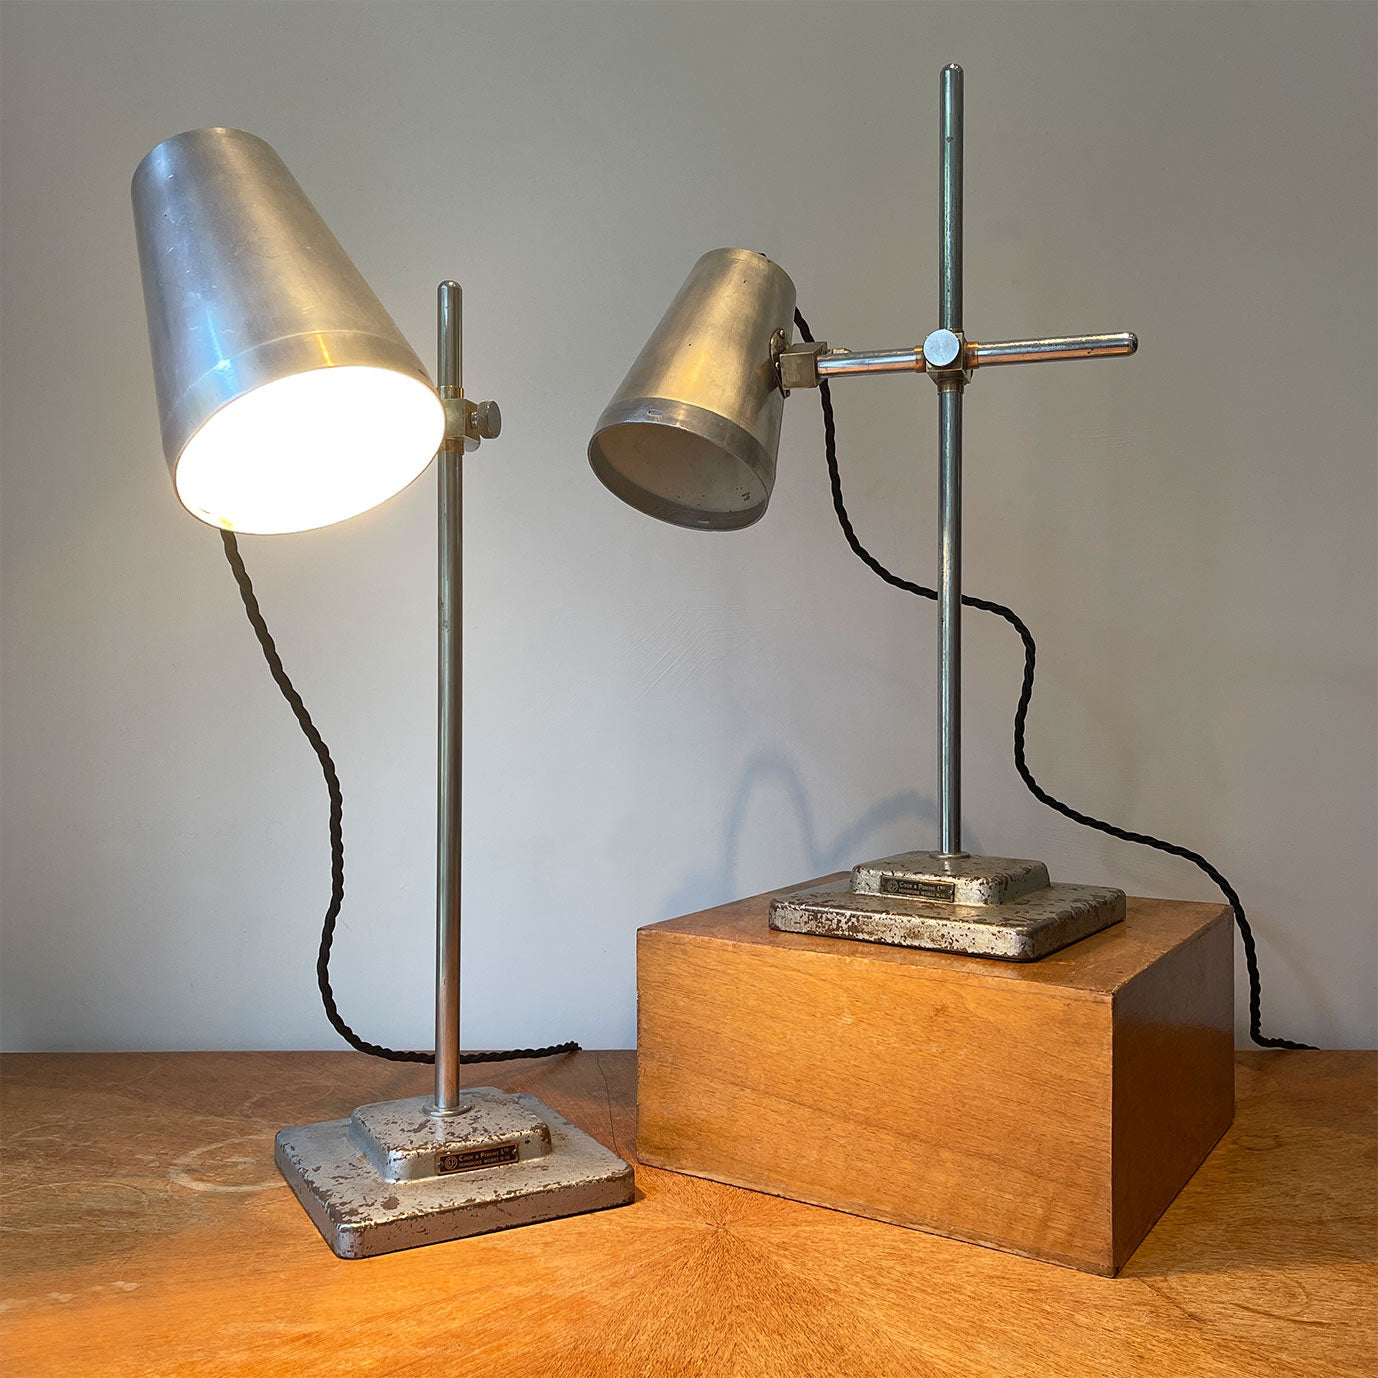 A Pair of Vintage Cook & Perkins Lab Lamps. Each Lamp has a Cook & Perkins plaque on its base - SHOP NOW - www.intovintage.co.uk